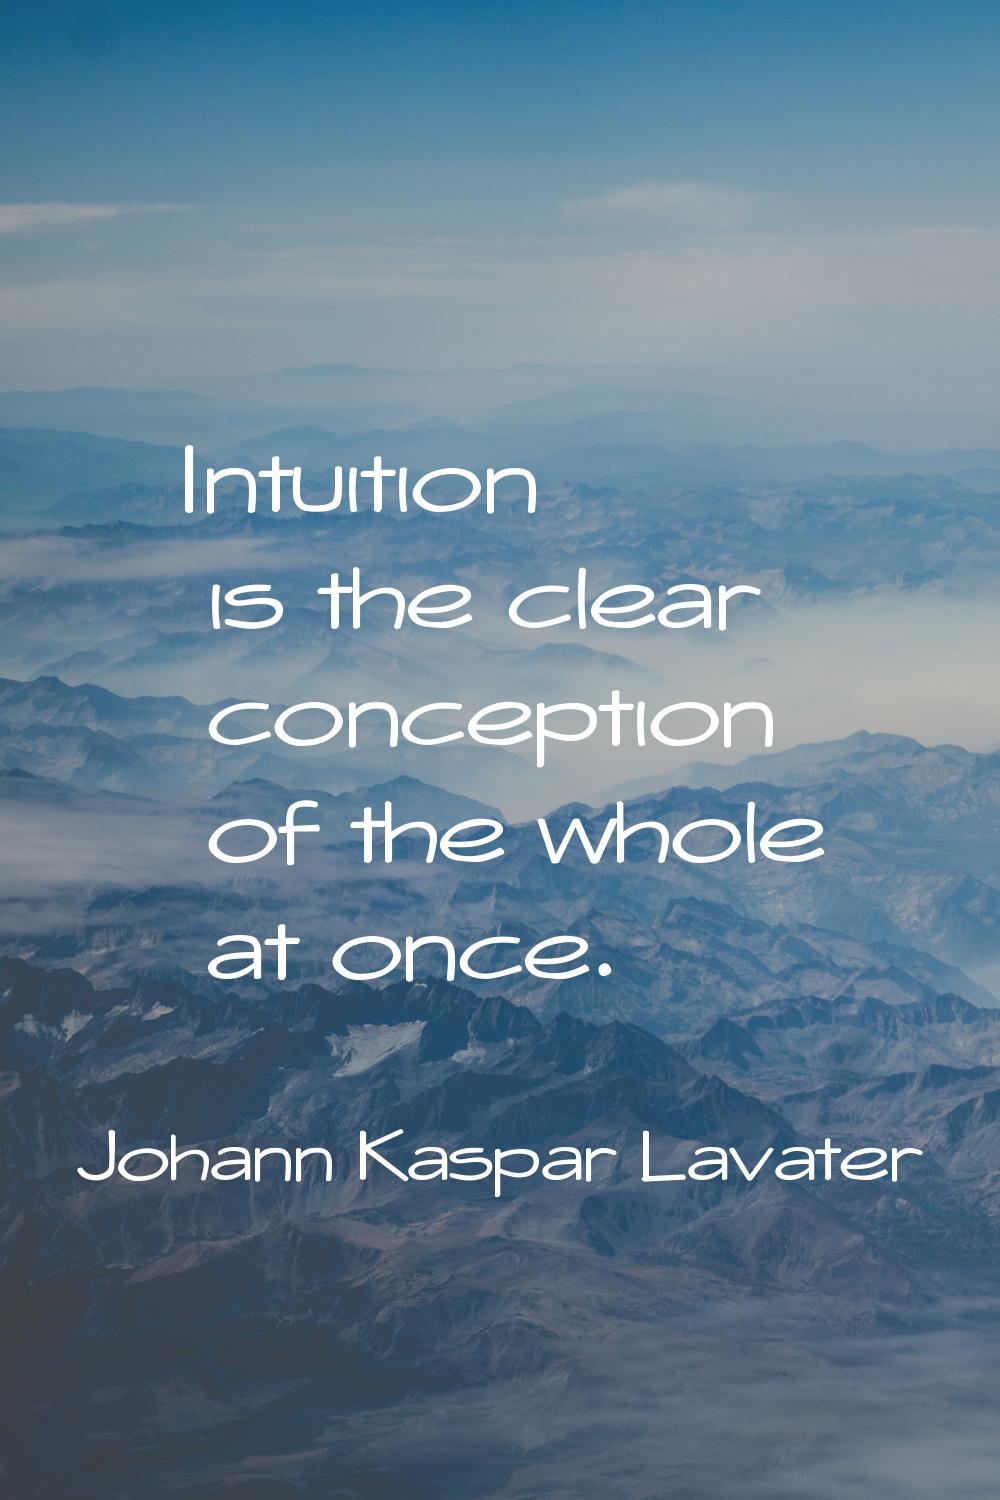 Intuition is the clear conception of the whole at once.